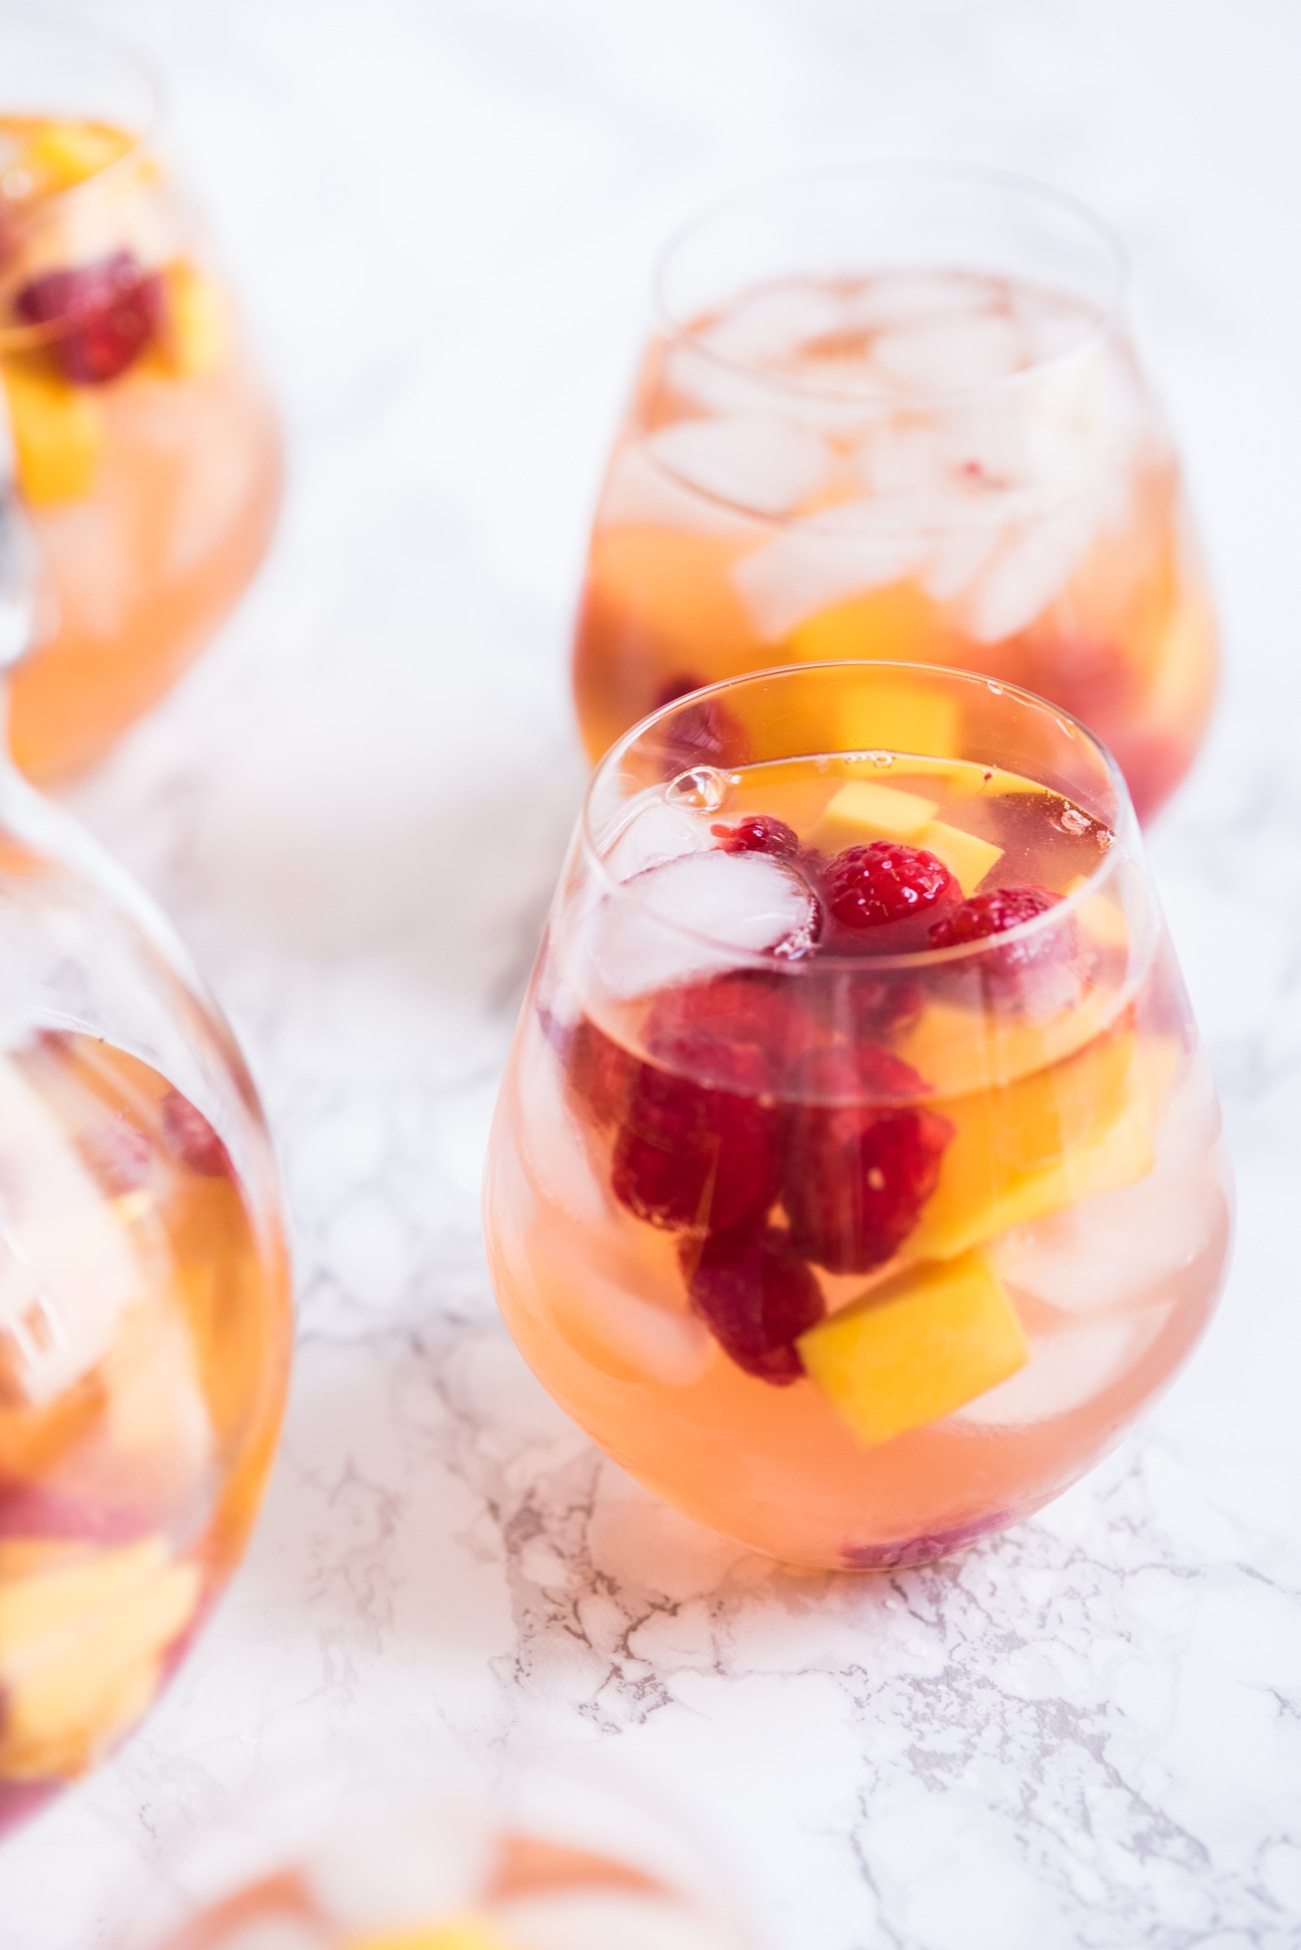 Sparkling Summer Solstice Sangria Recipe | Entertaining tips, cocktail recipes, party ideas, summer solstice ideas and more from @cydconverse